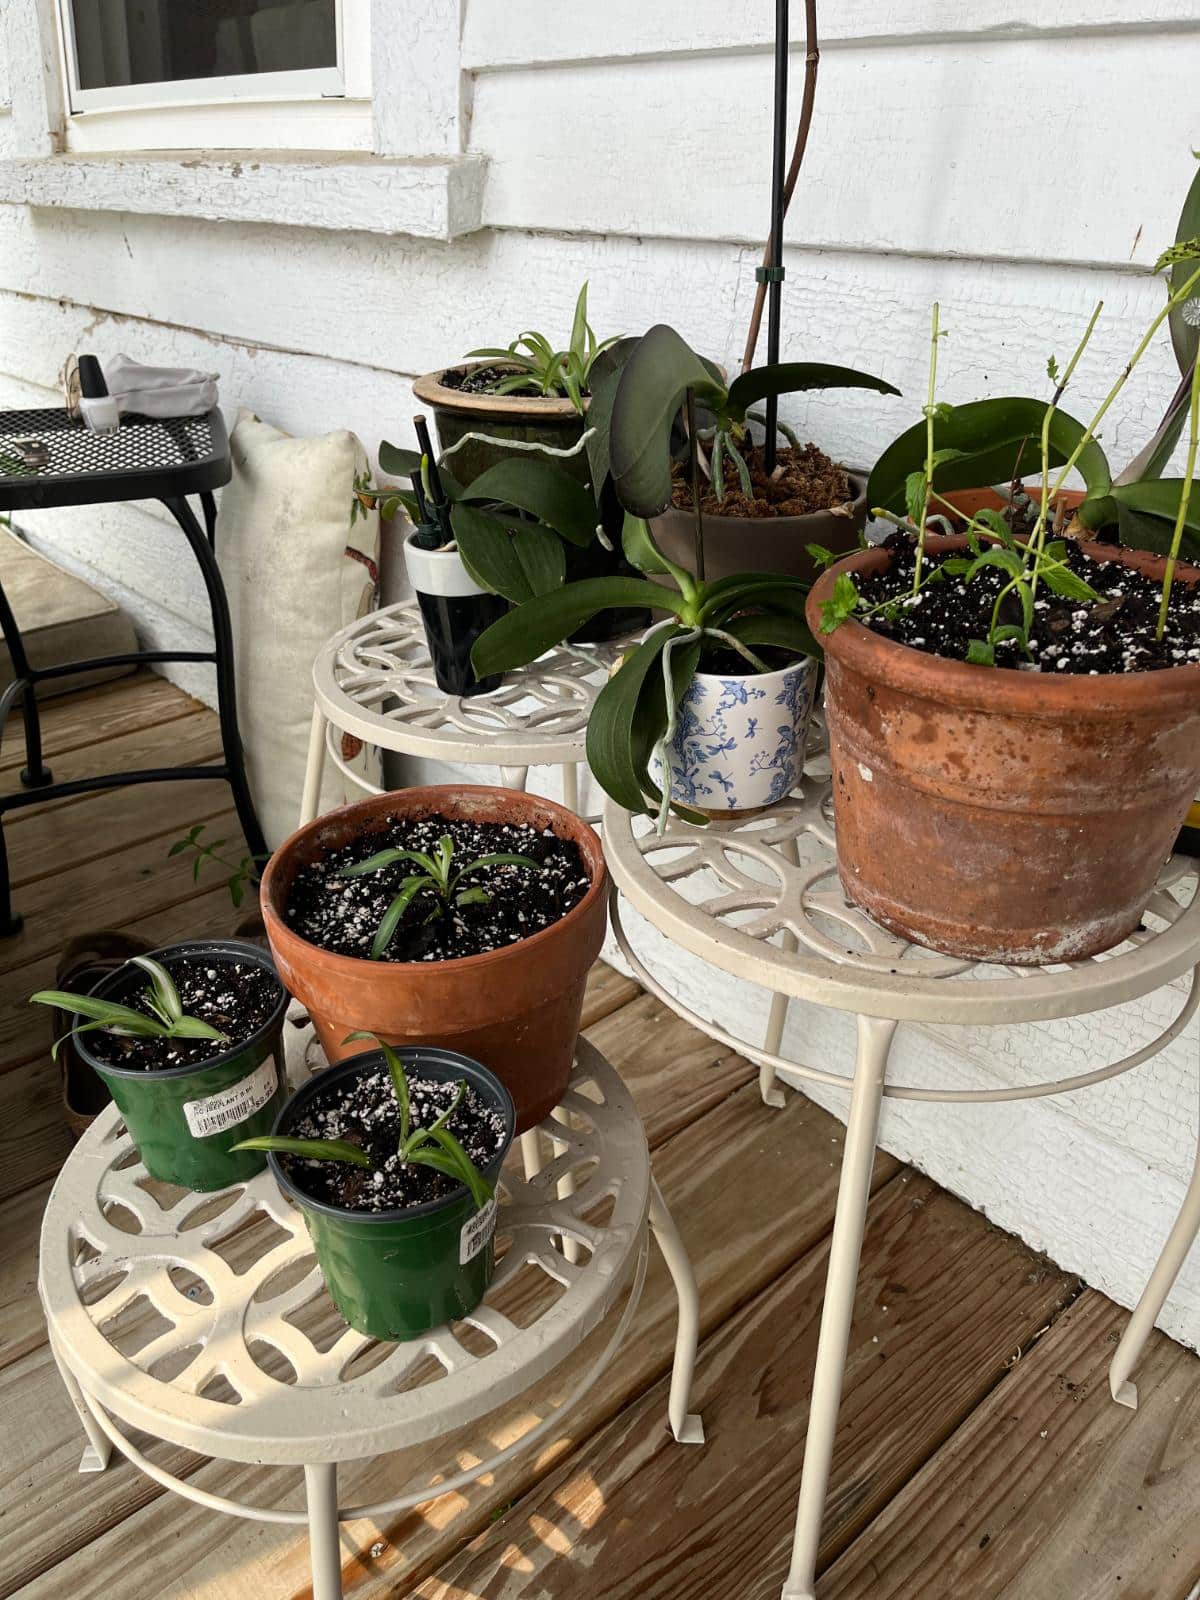 Plants potted in used soil